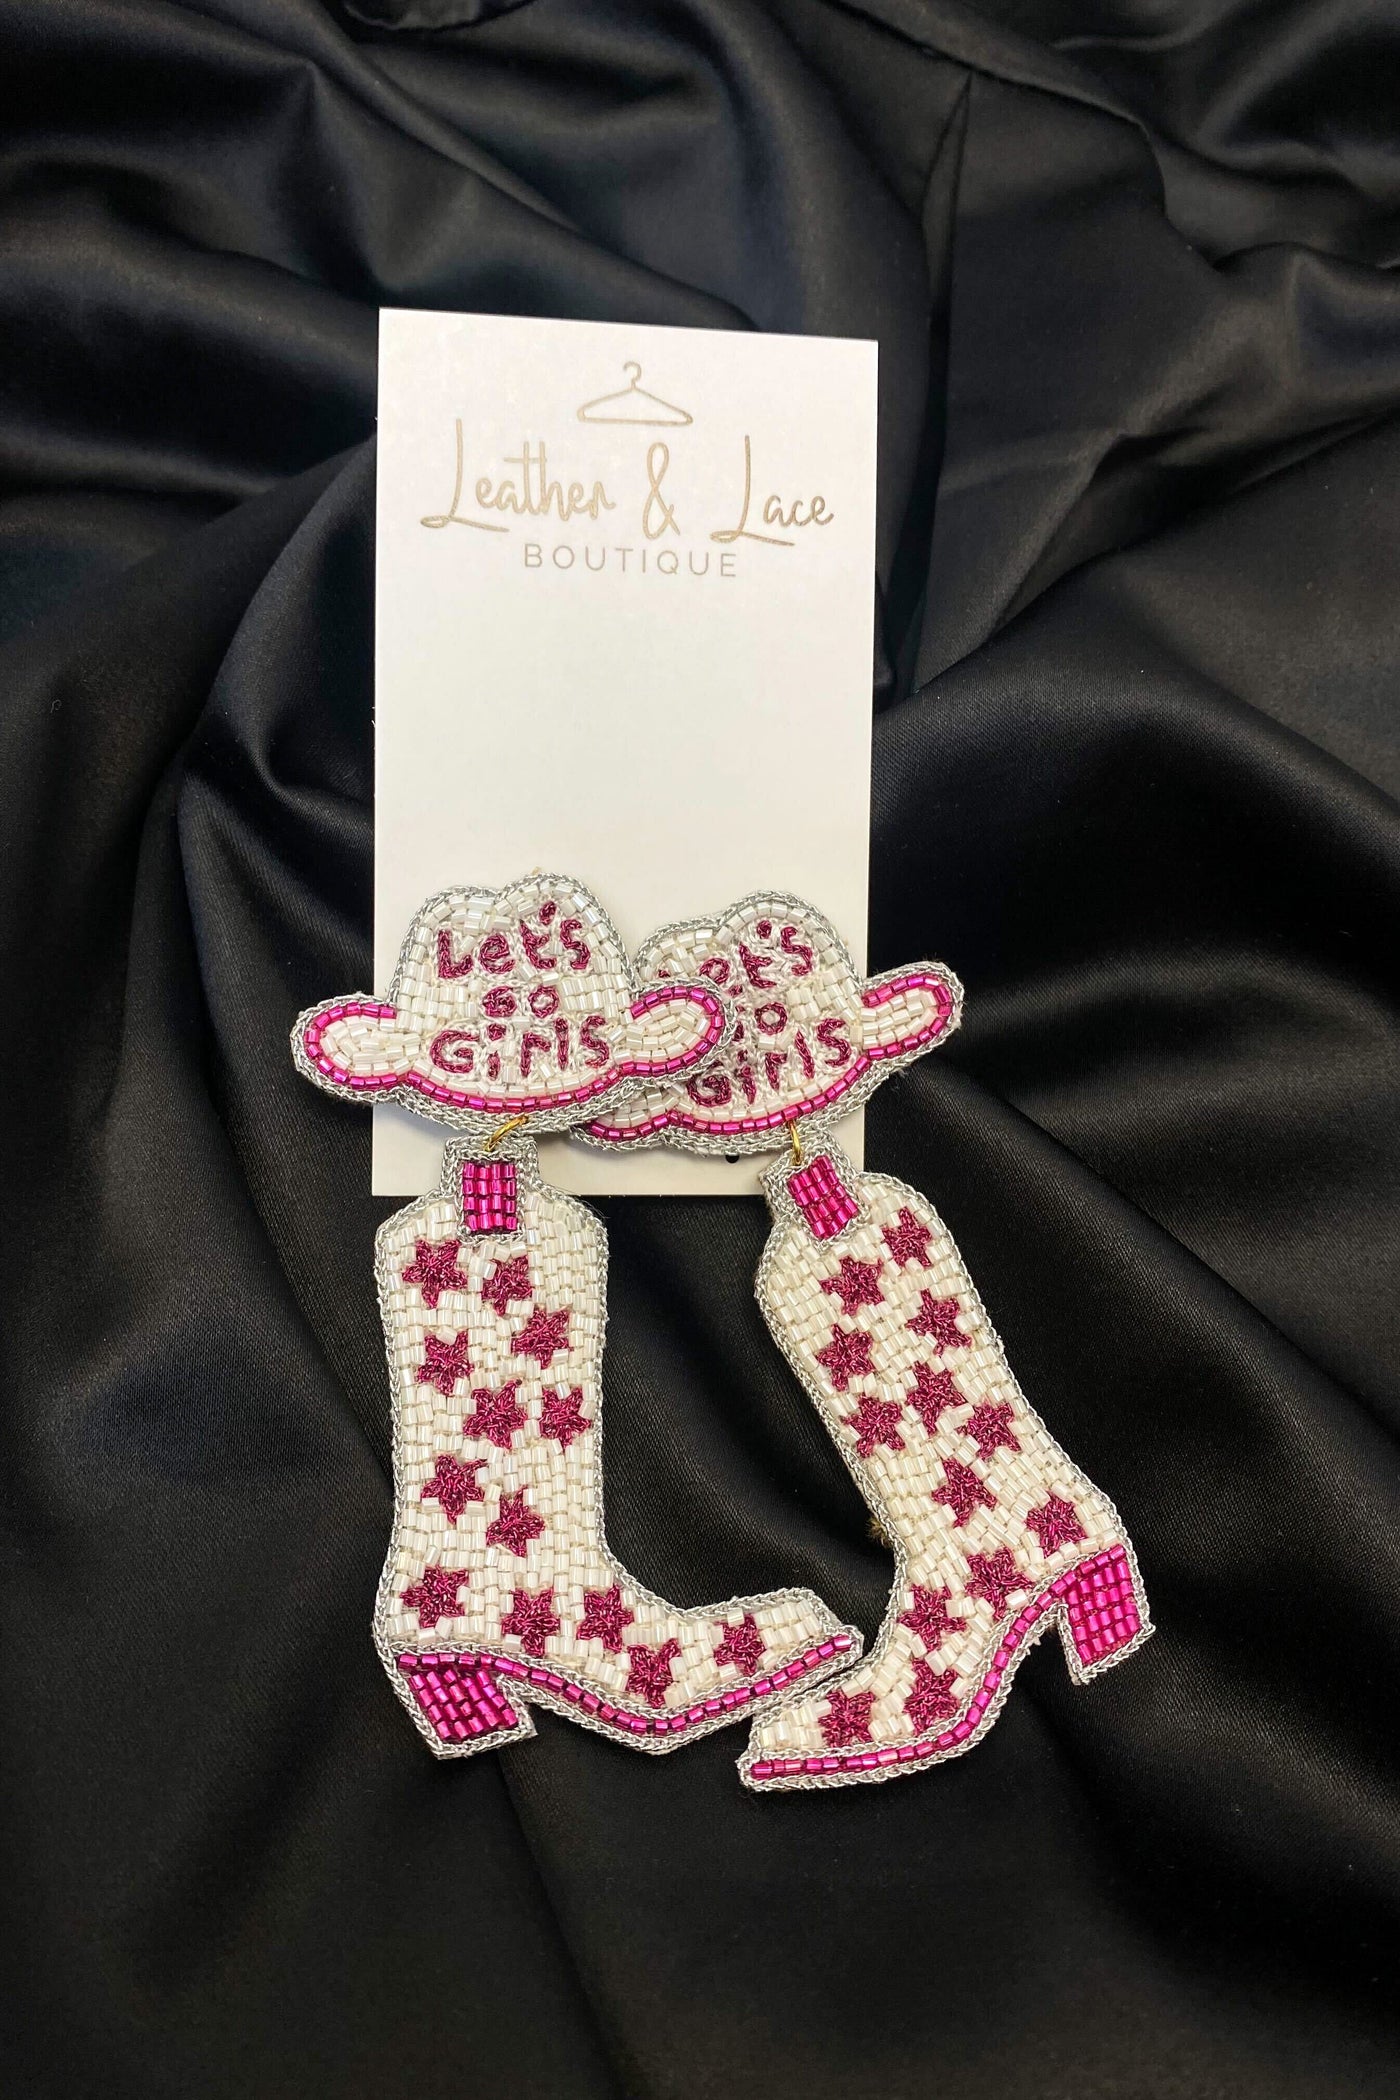 Let's Go Girls Beaded Boot Earrings - White-190 - ACCESSORIES - JEWELRY-TAYLORSHAYE-[option4]-[option5]-[option6]-Leather & Lace Boutique Shop